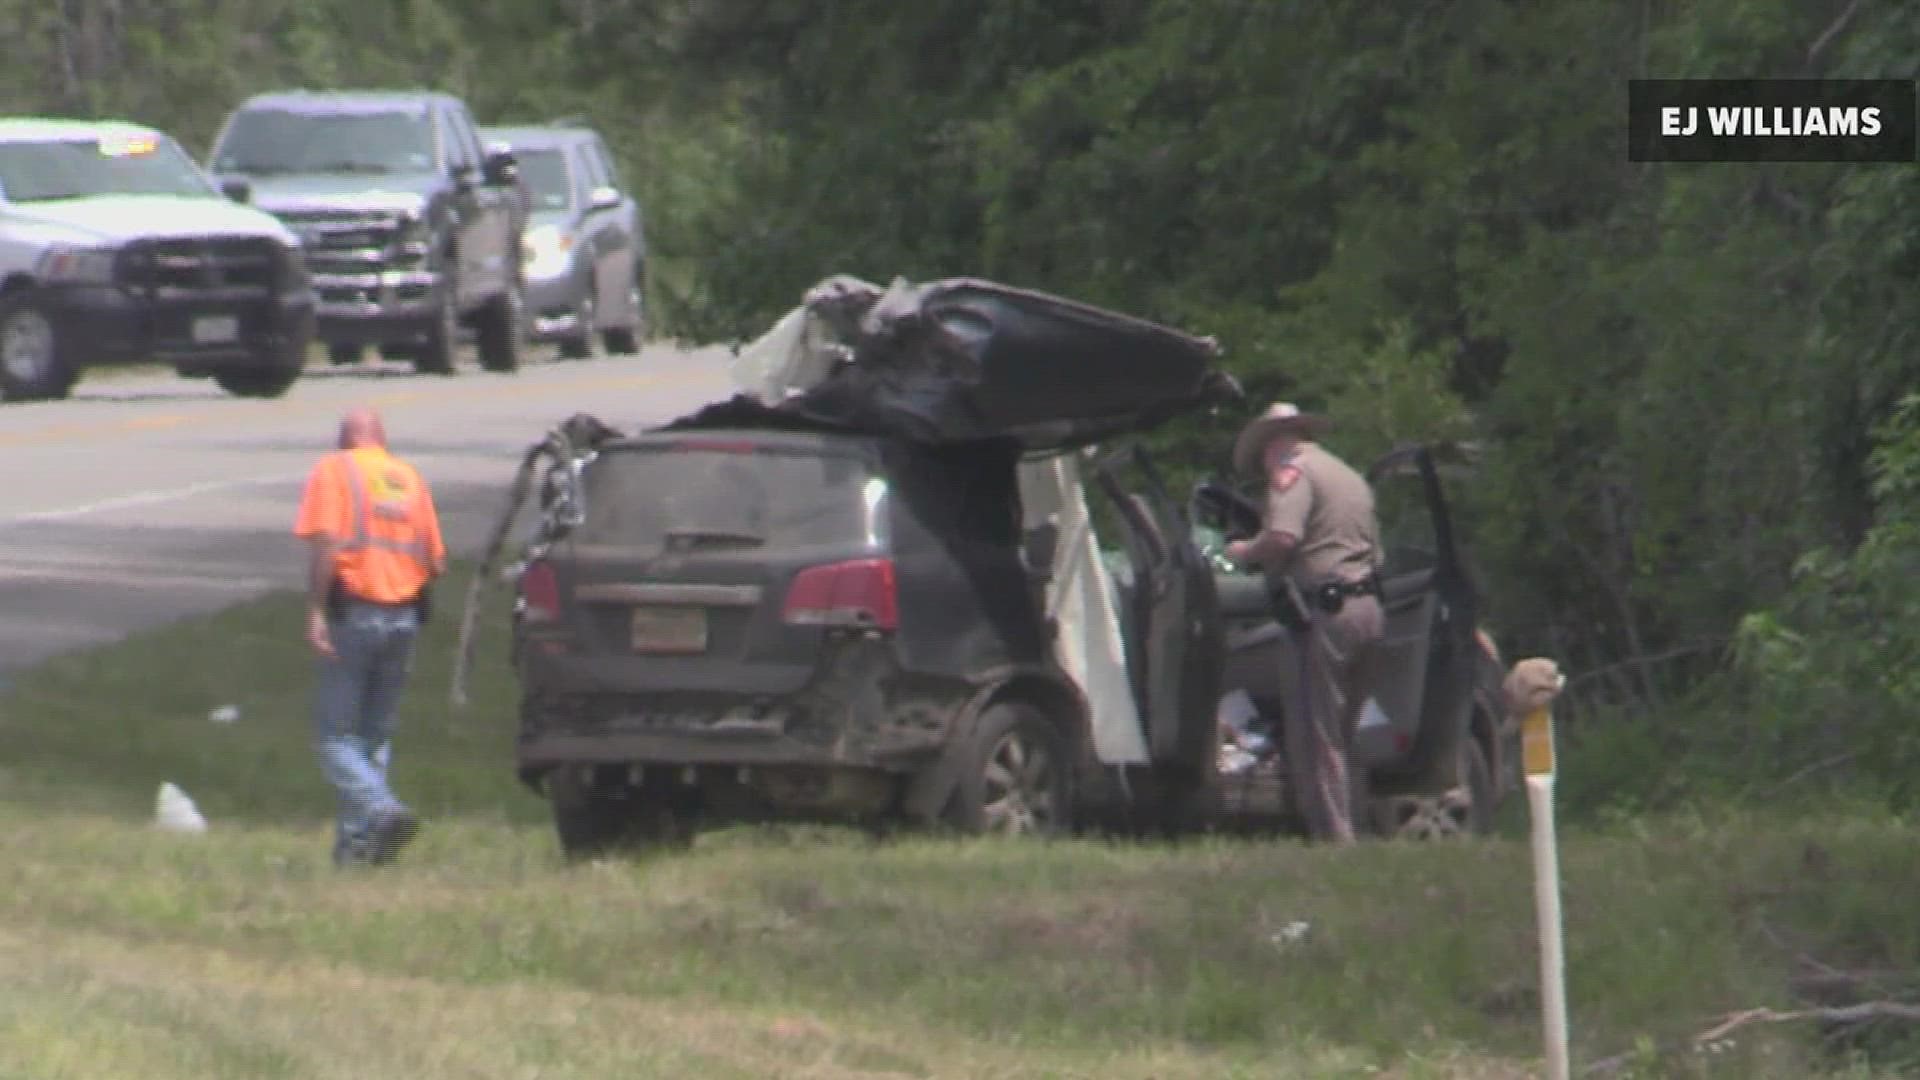 Troopers with the Texas Department of Public Safety are investigating after a crash involving a commercial vehicle left a 51-year-old man injured.